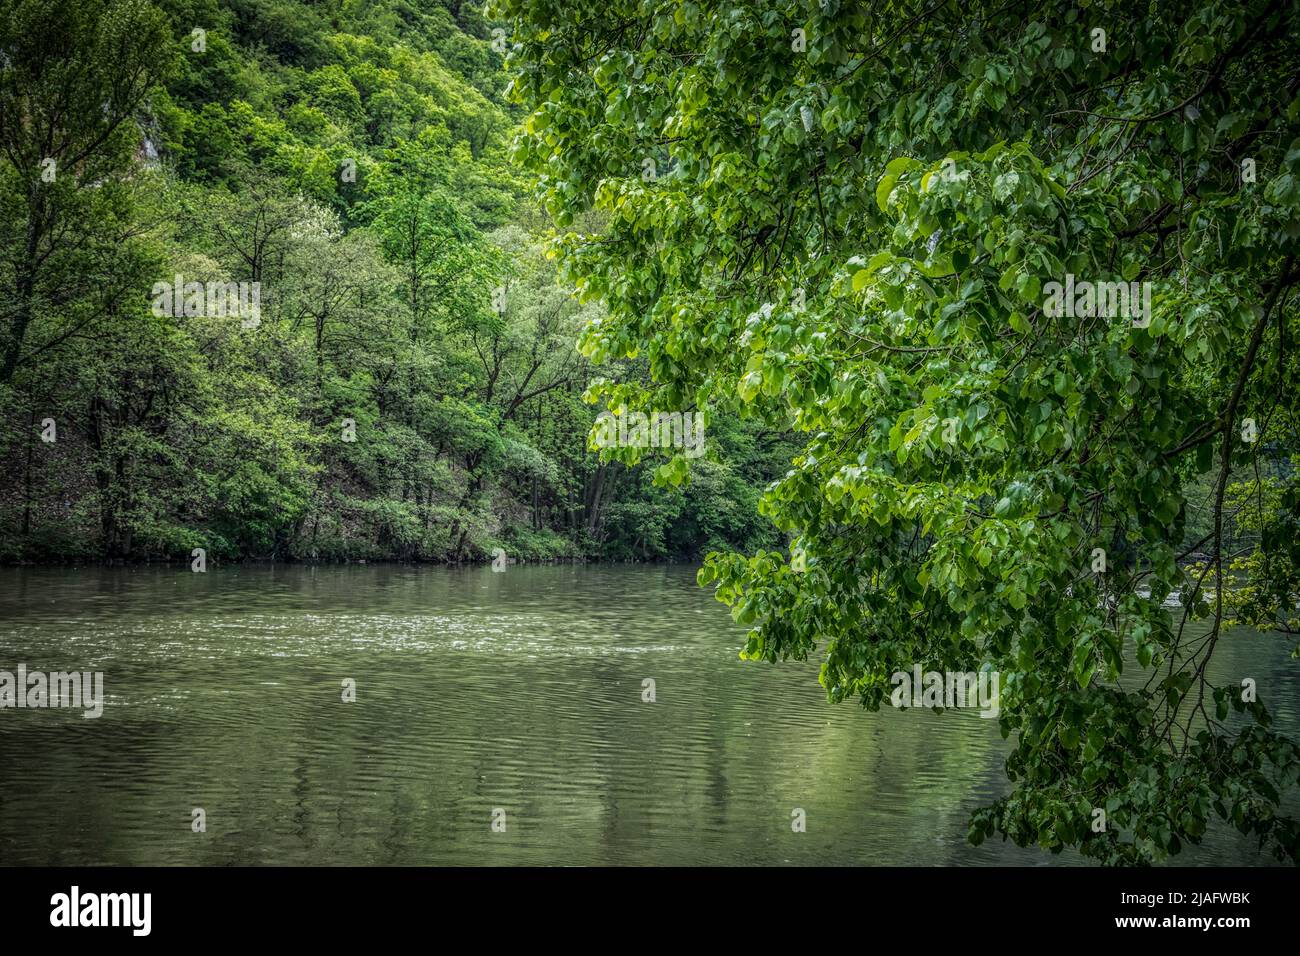 Beautiful nature on the banks of Western Morava river in Serbia Stock Photo